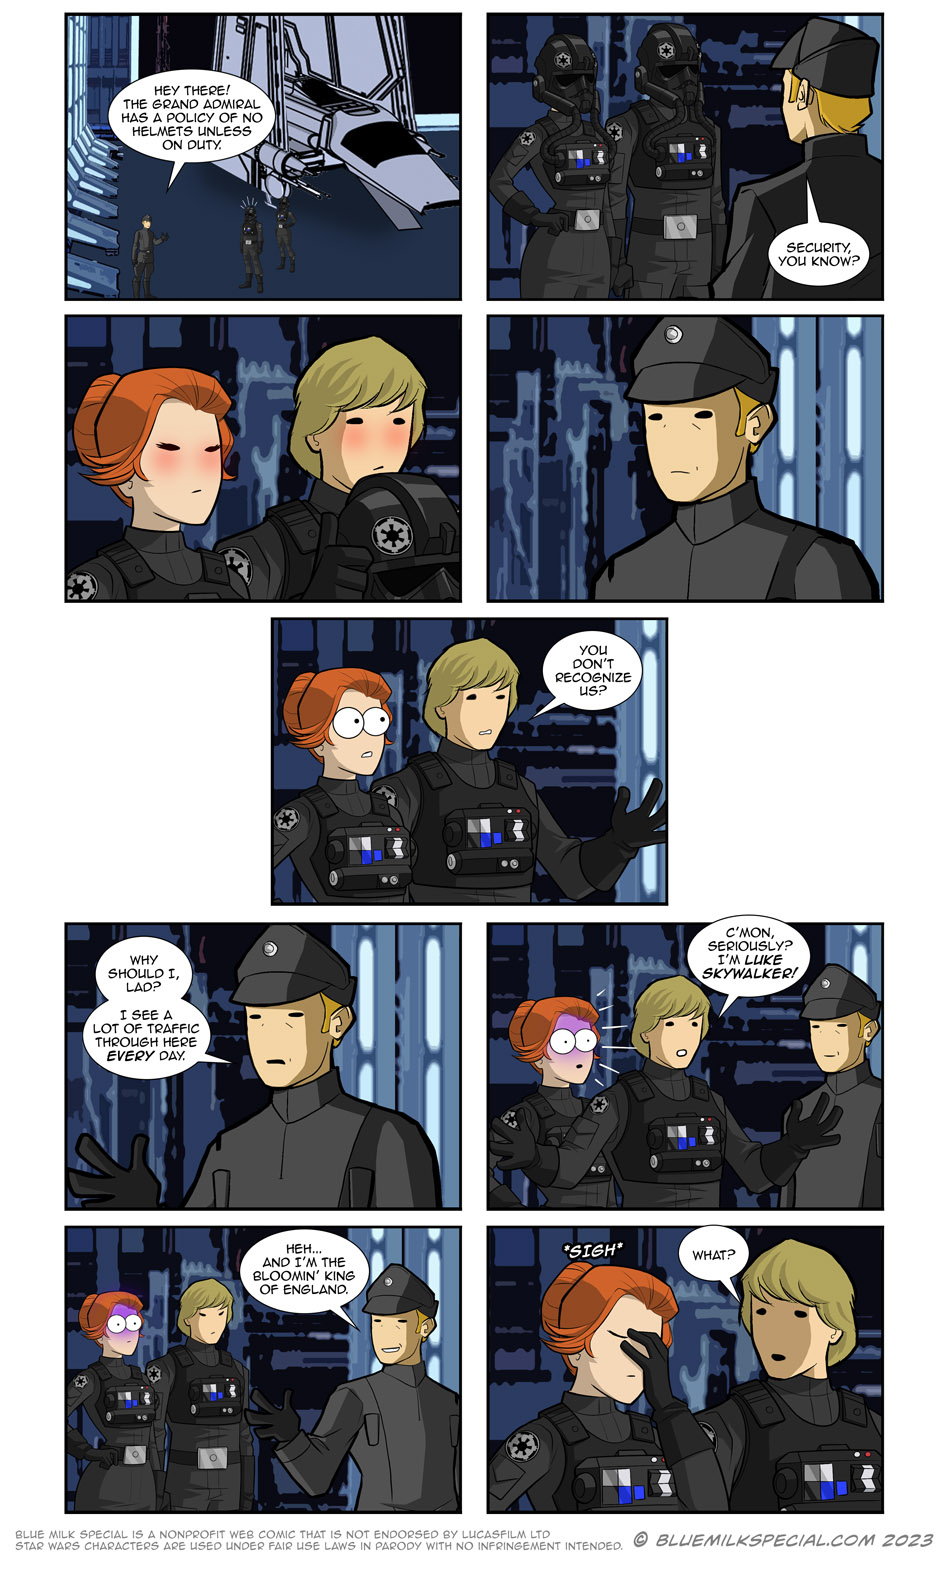 Silly TIE Fighter Pilots